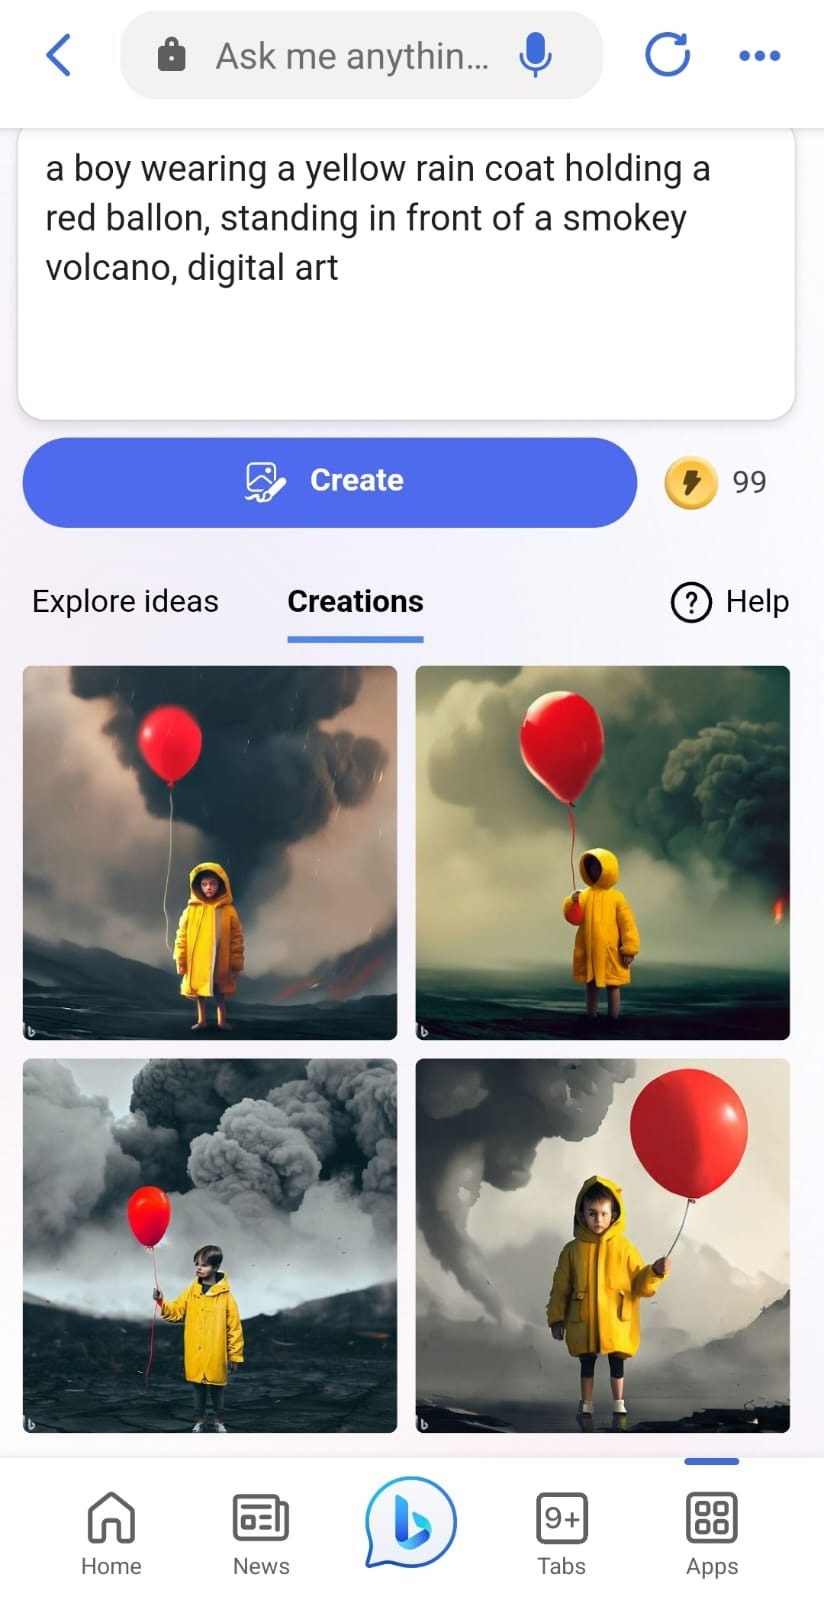 The Bing Image Generator creating an image of a young boy in a yellow raincoat holding a red balloon. 